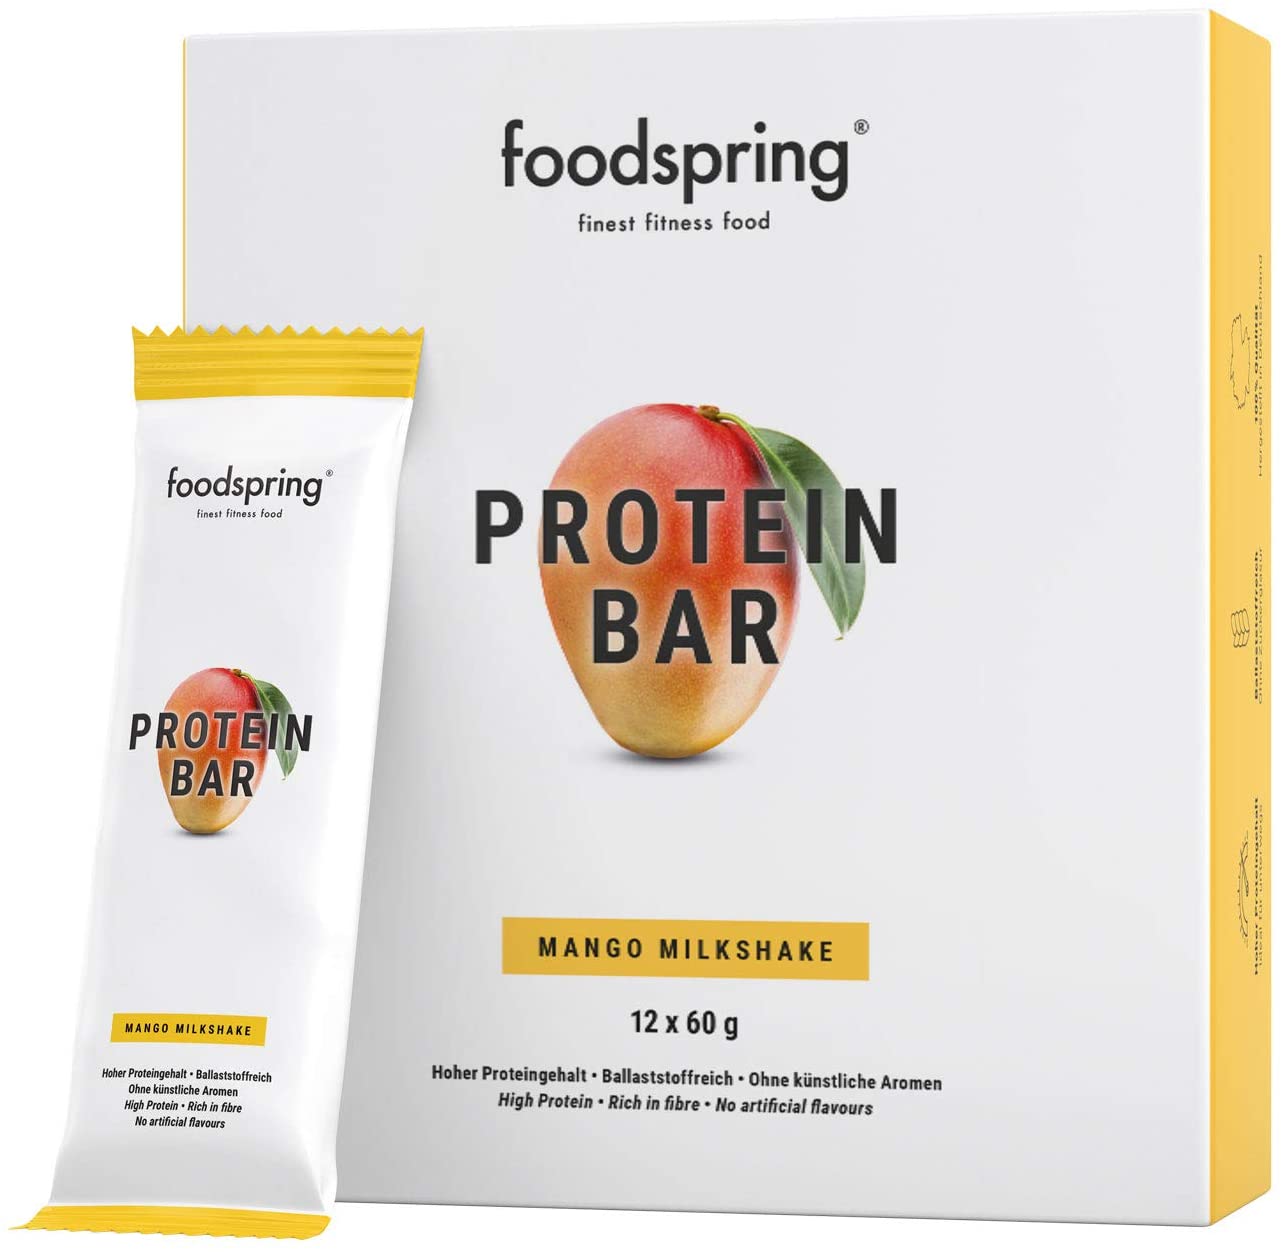 foodspring Protein Bars, Mango Milkshake, 12 x 60g, 33% Protein, Low in Sugar, Perfect after training or as a travel snack